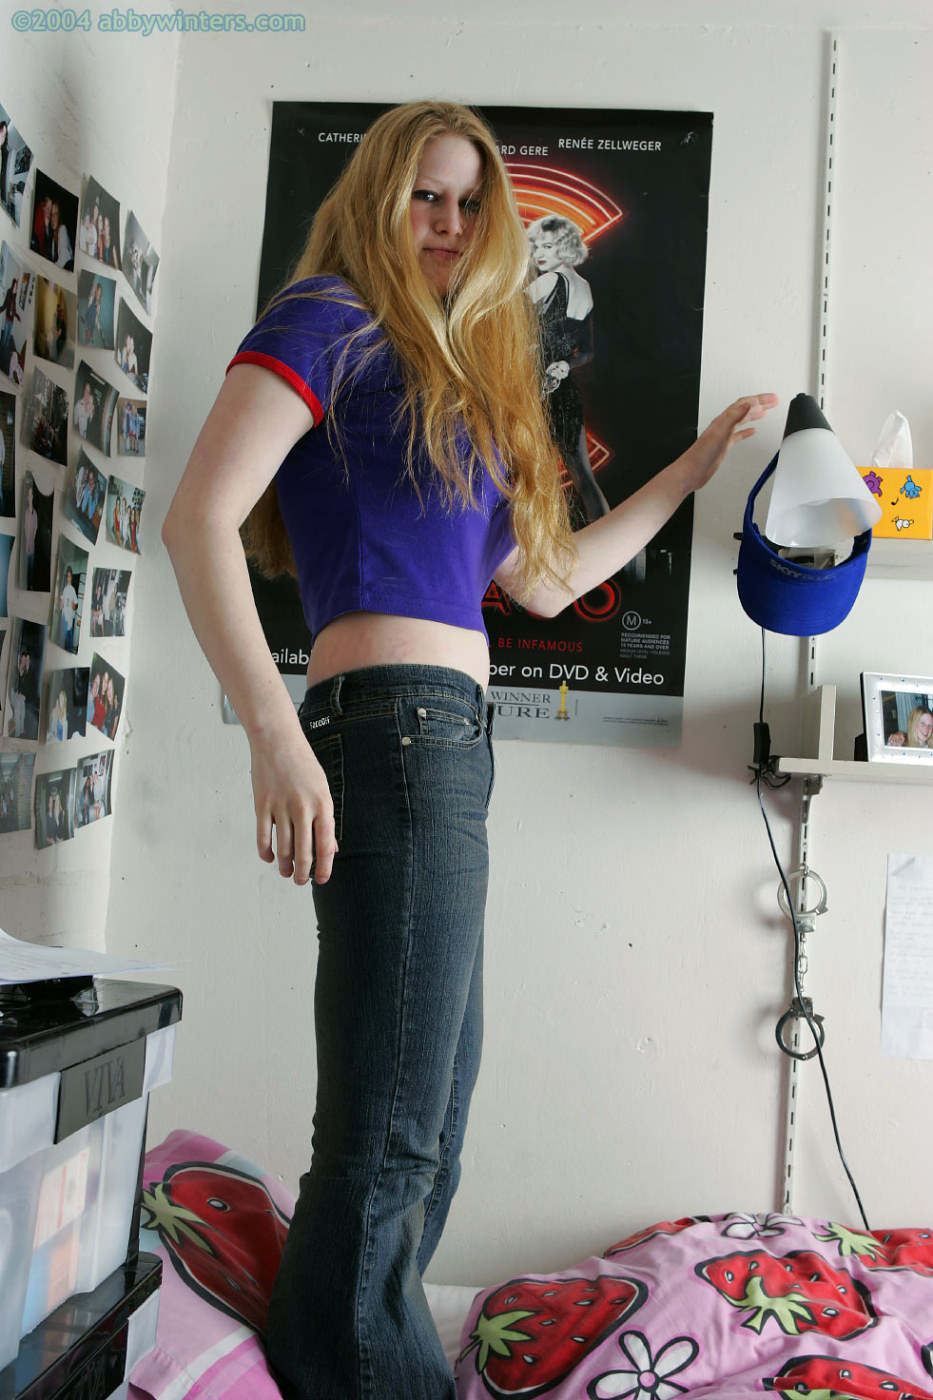 Big boobs chick Chloe in black jeans - 02-chloe_b002 from Abby Winters